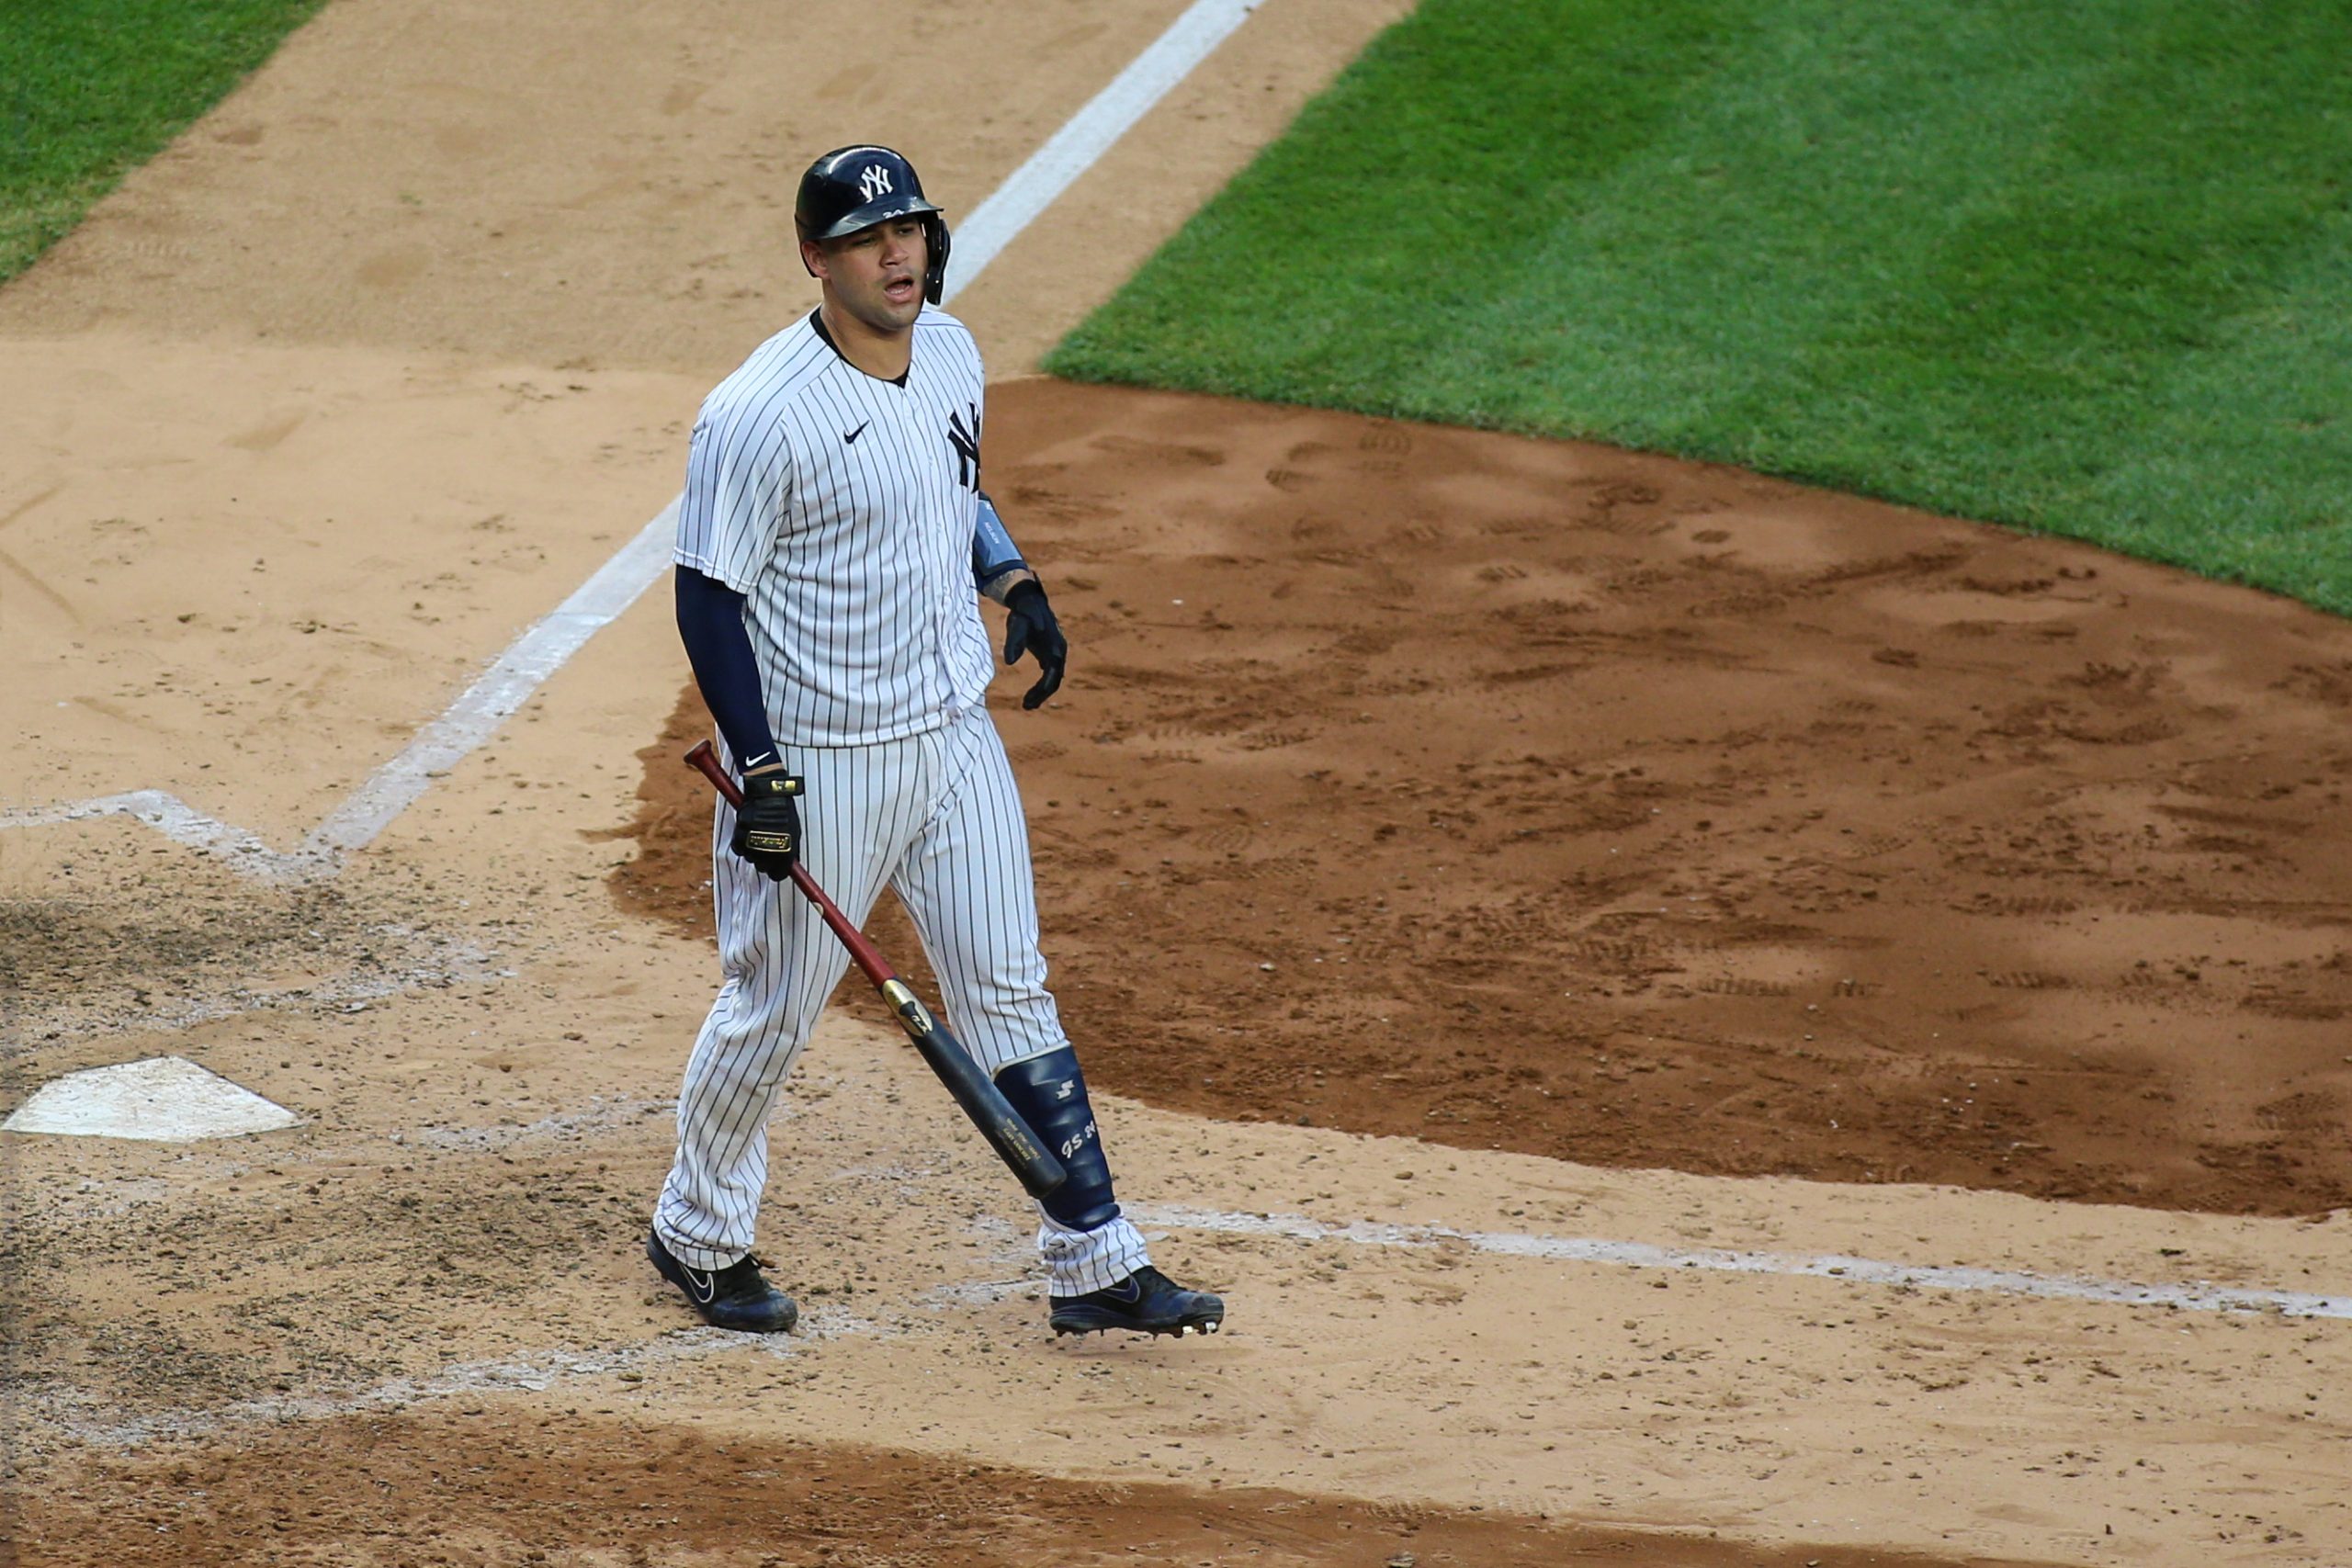 2021 could be Gary Sanchez's last stand with Yankees